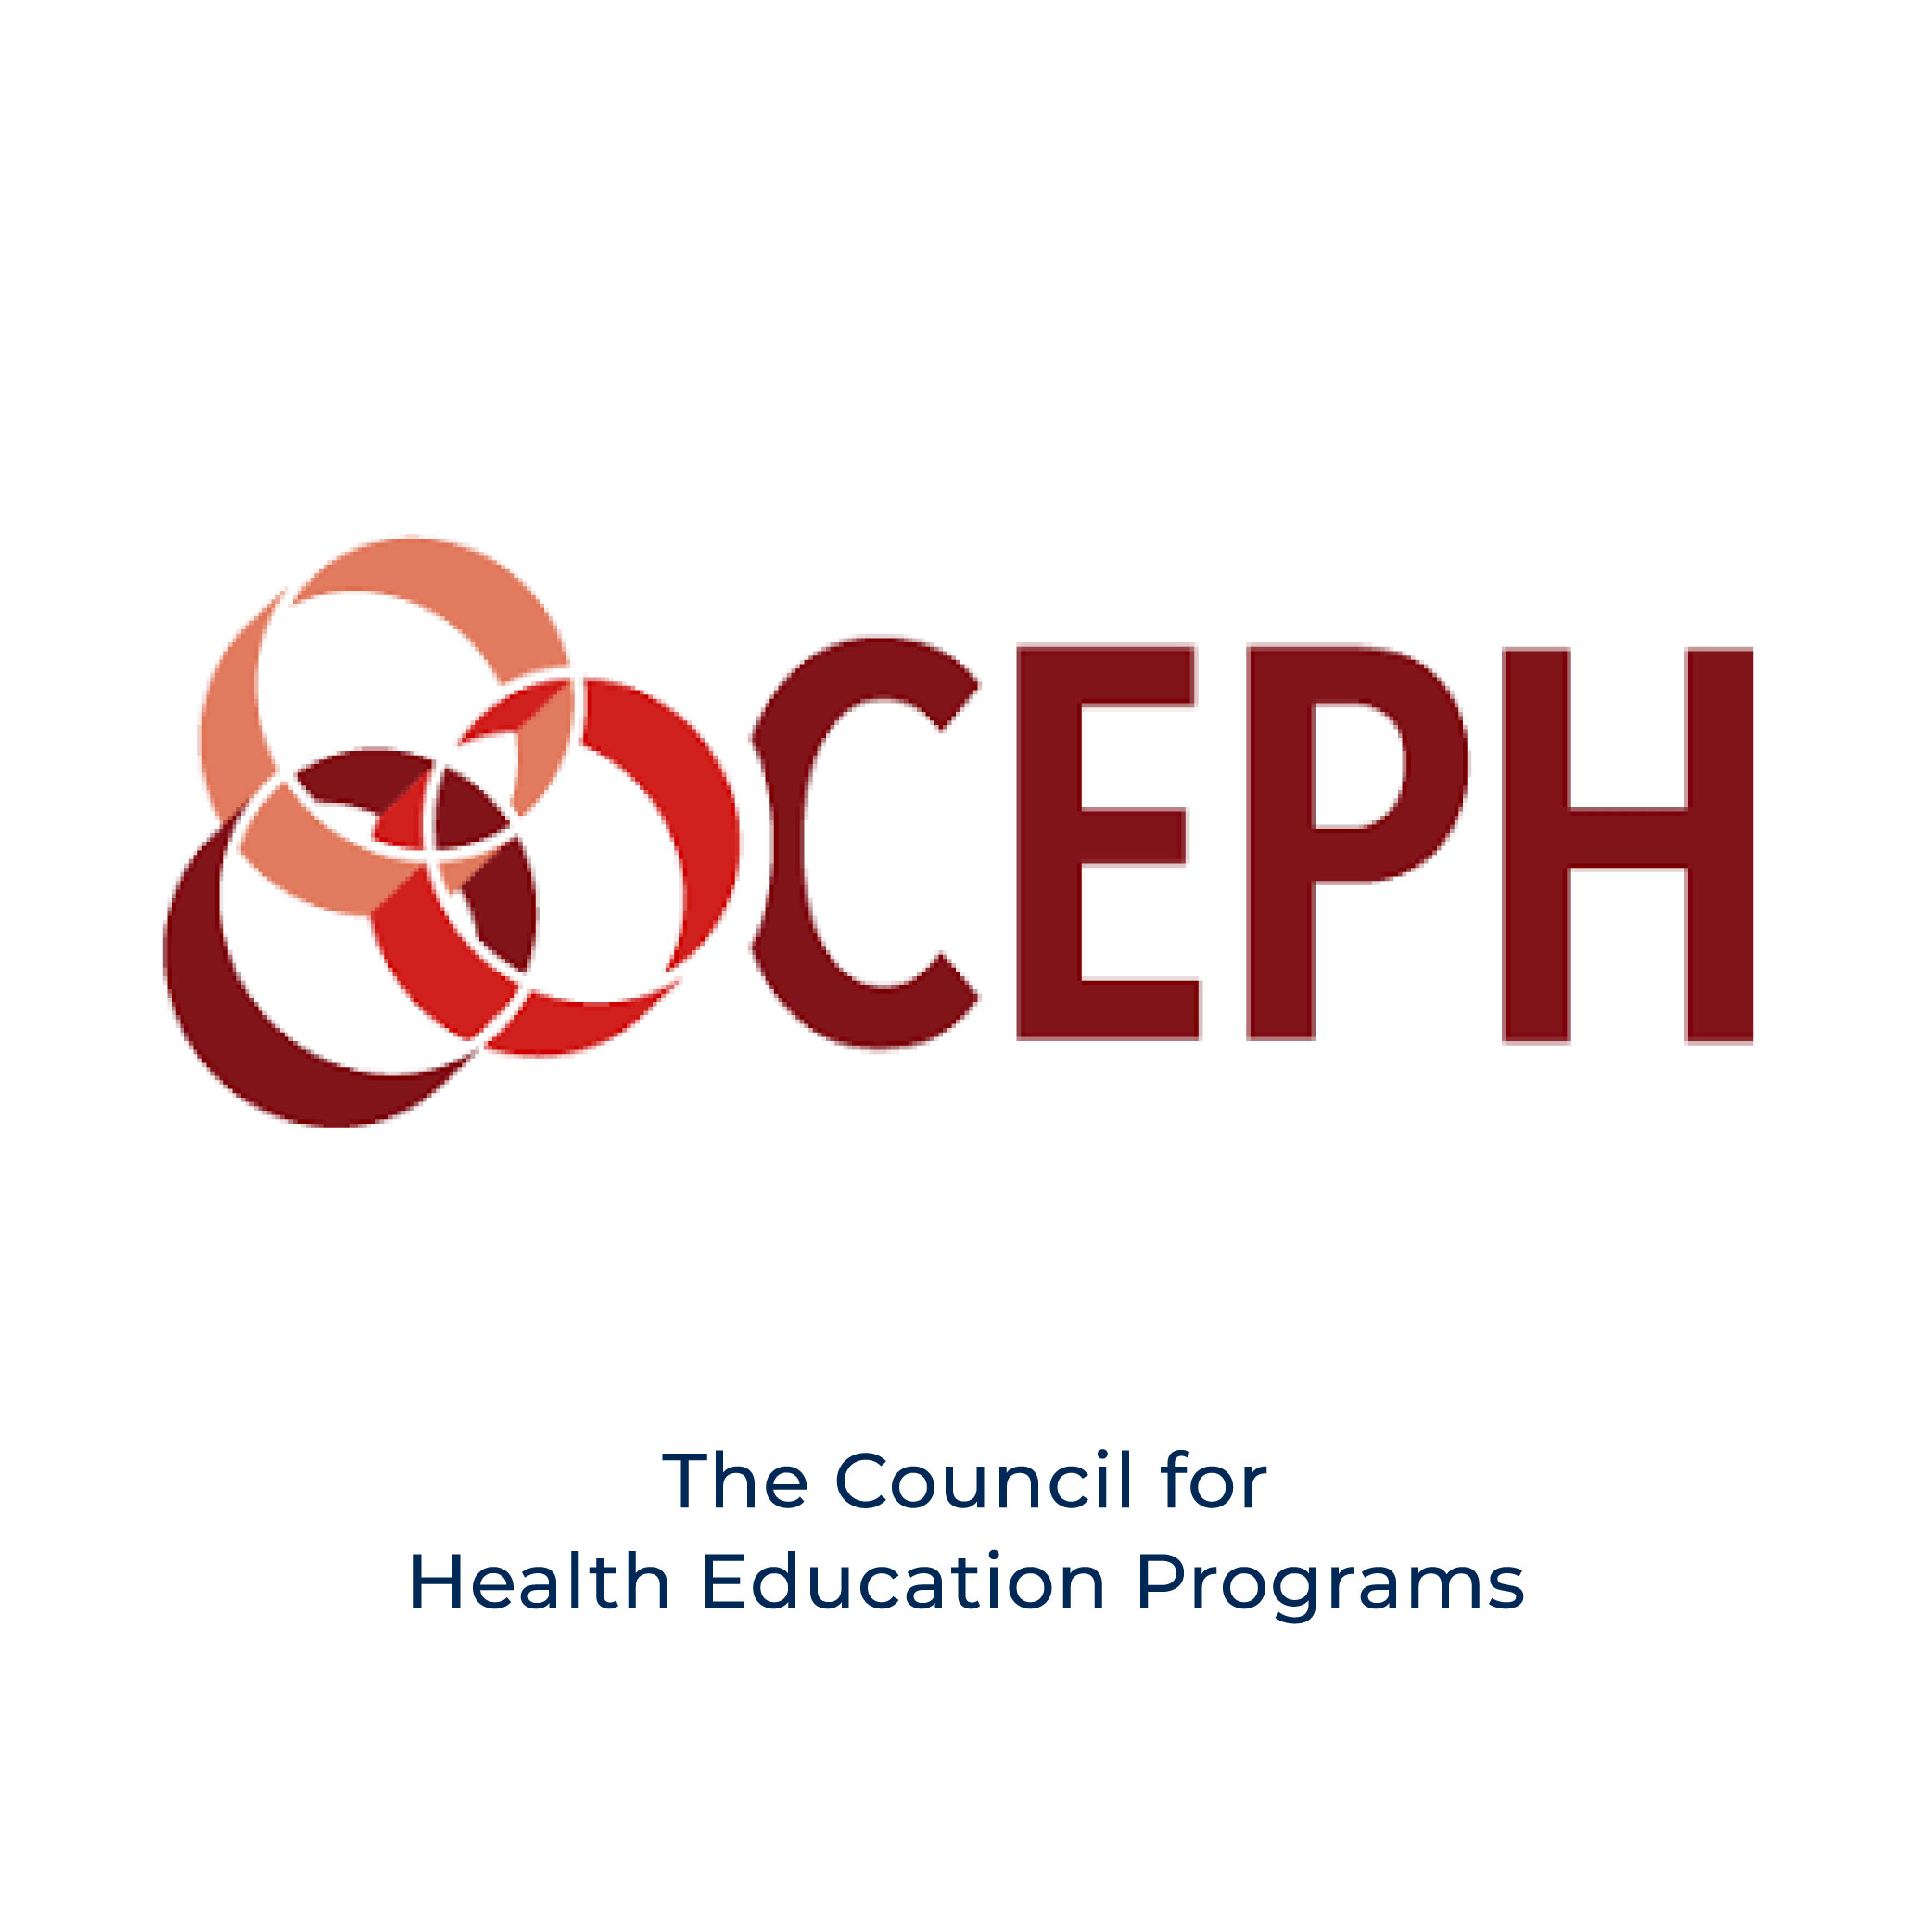 The Council for Health Education Programs